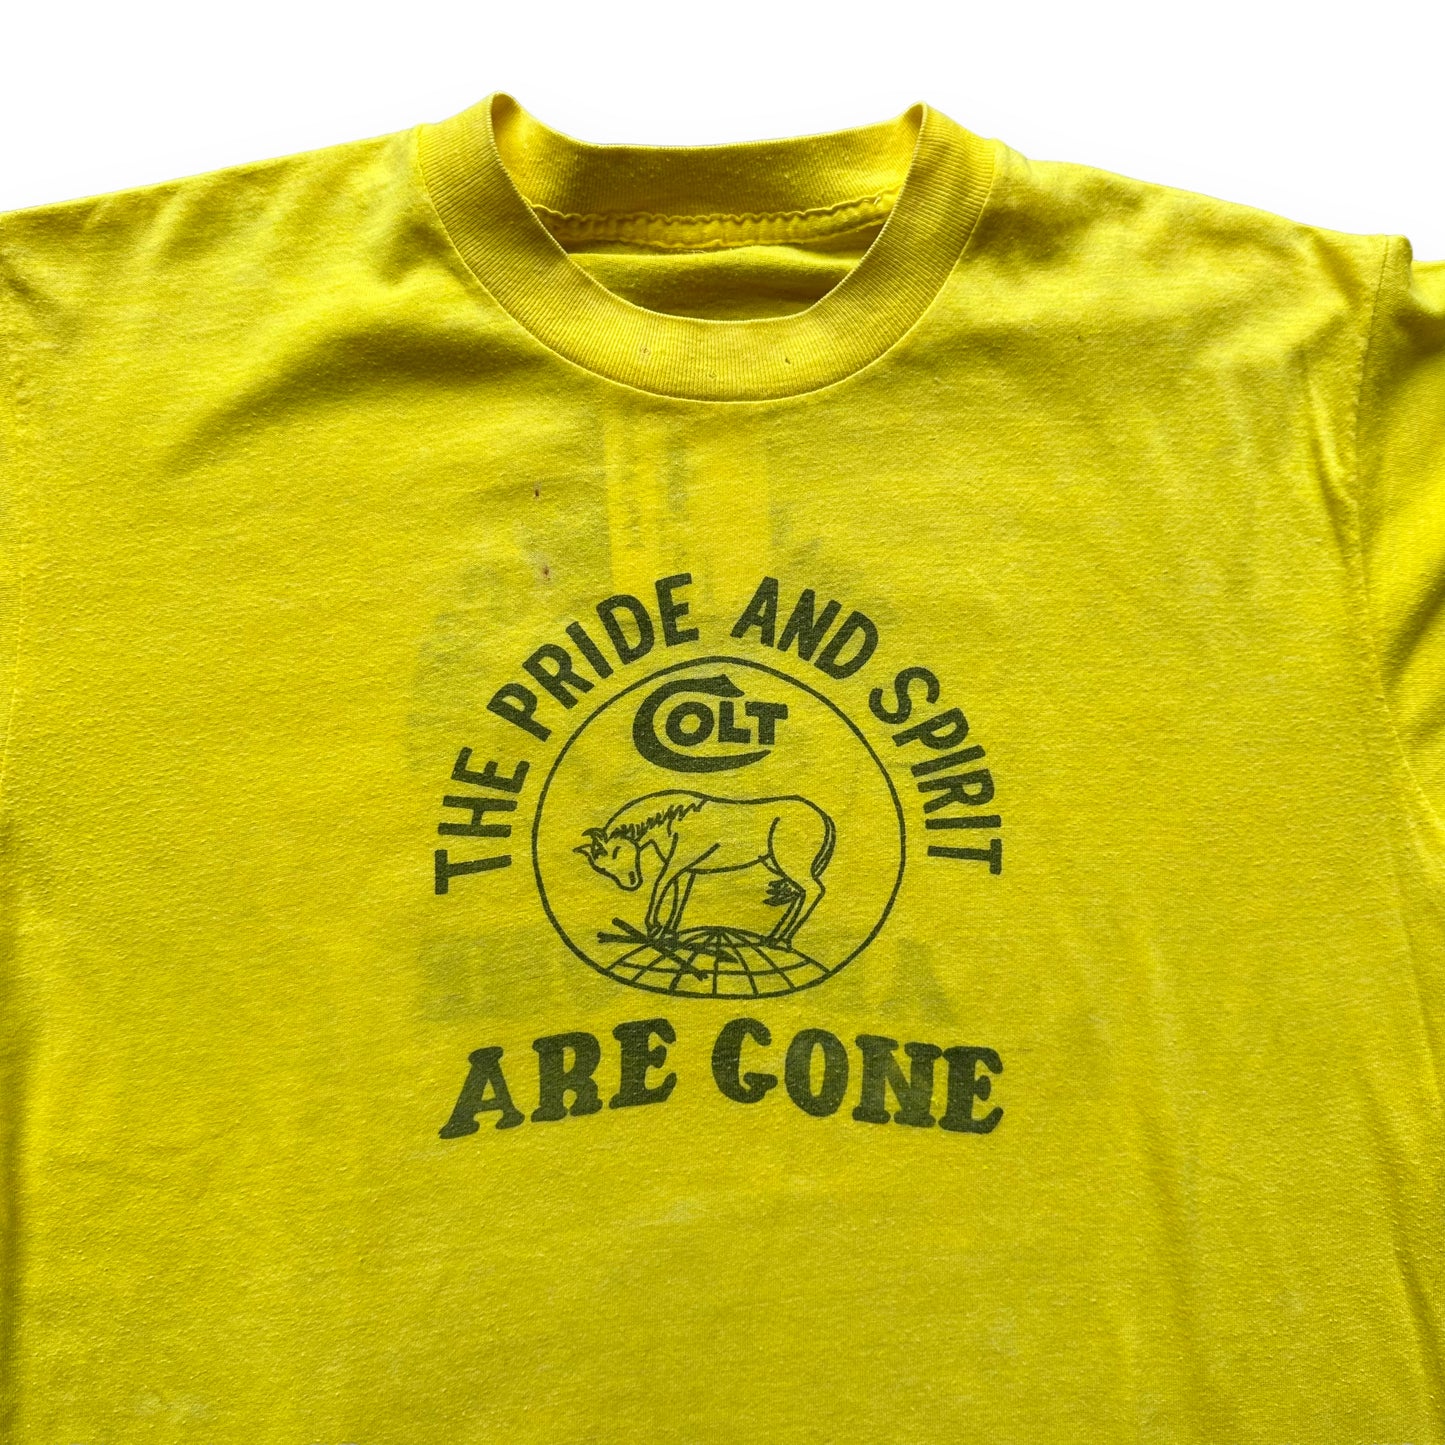 Upper Front View of Vintage Colt "The Pride and Spirit Are Gone" Tee SZ L | Vintage T-Shirts Seattle | Barn Owl Vintage Tees Seattle